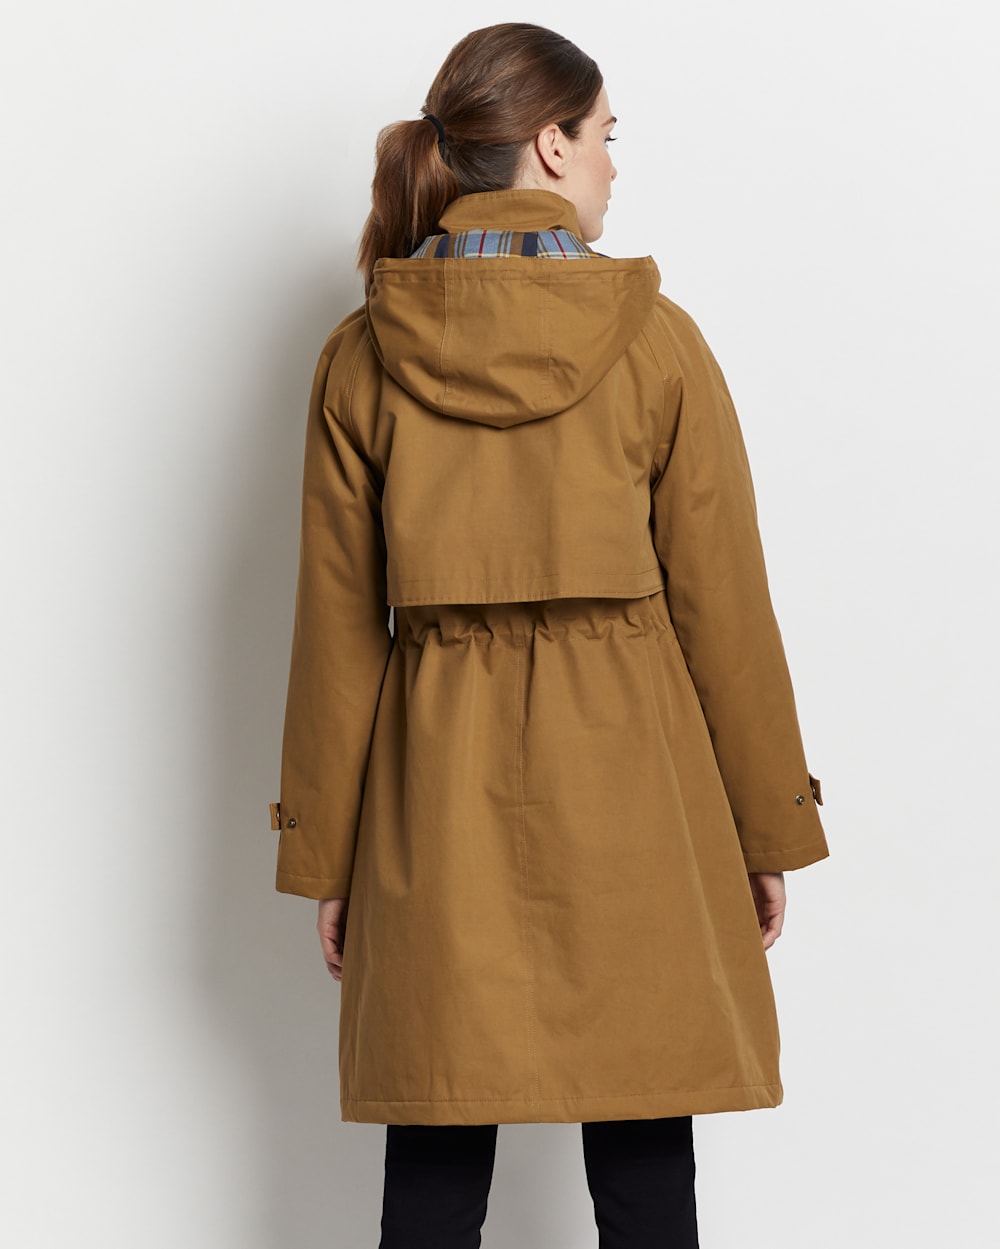 ALTERNATE VIEW OF WOMEN'S BANDON LONG UTILITY ANORAK IN OLIVE BRANCH image number 5